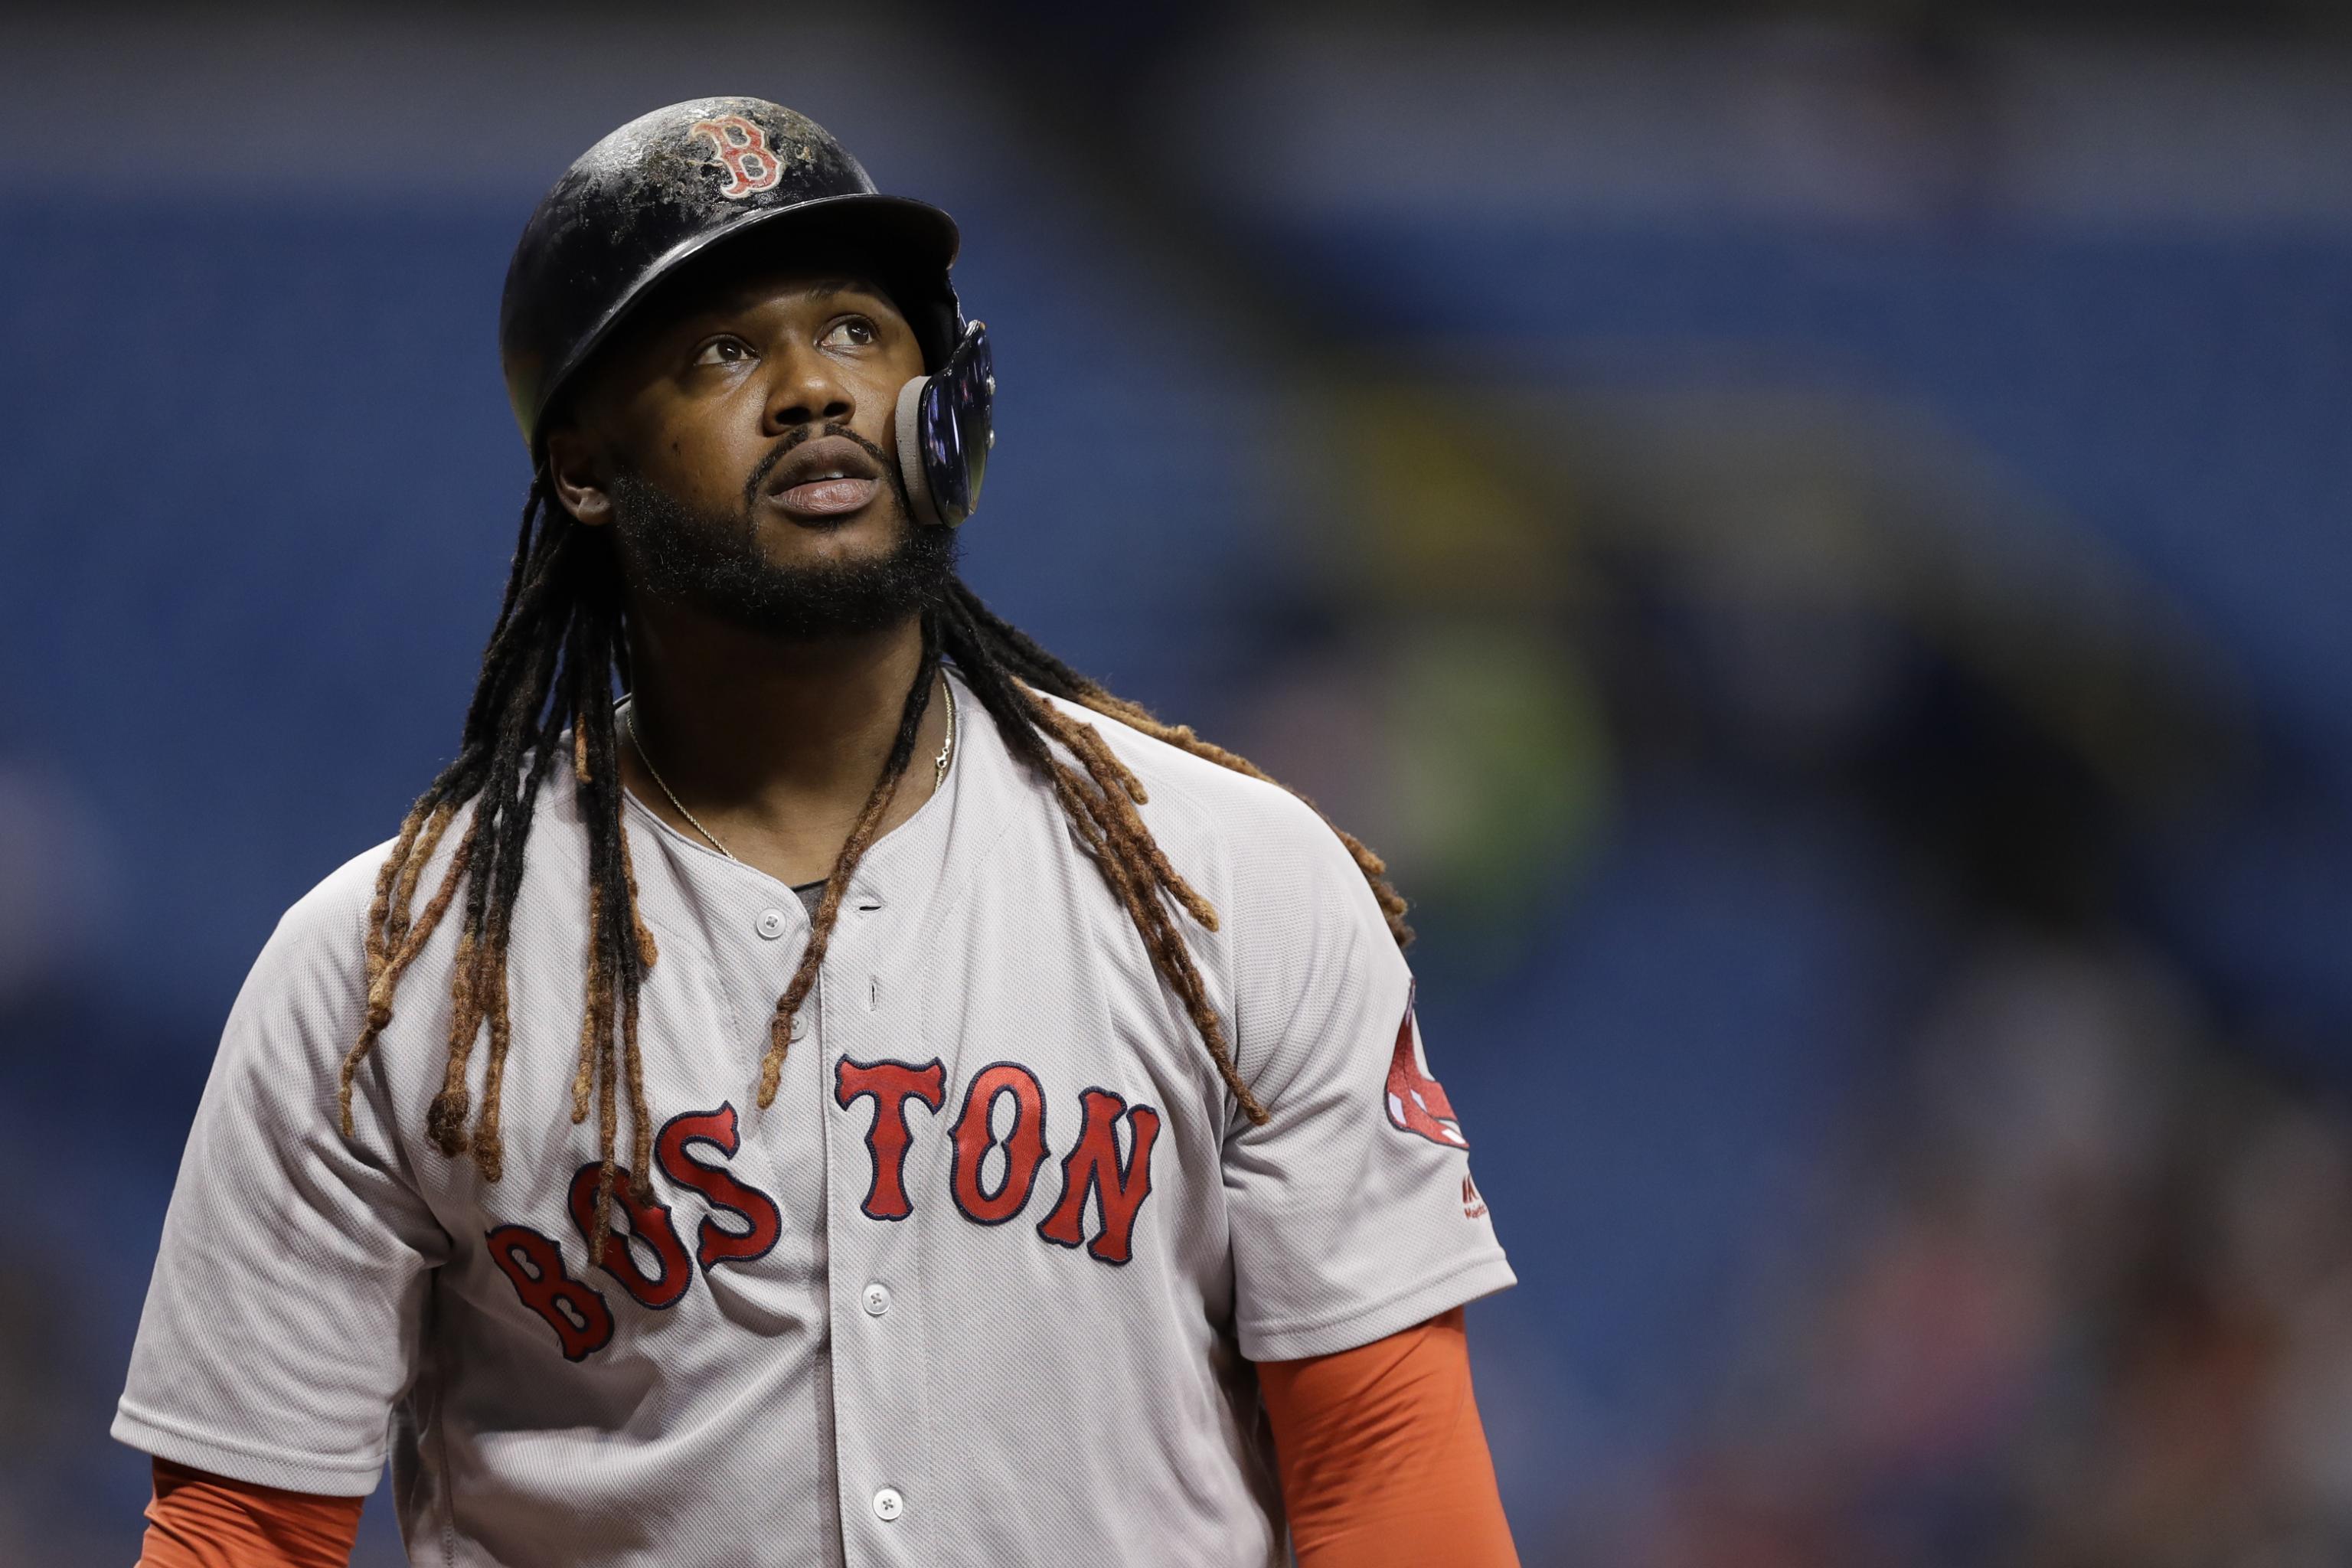 Hanley Ramirez will avoid disabled list for now after encouraging